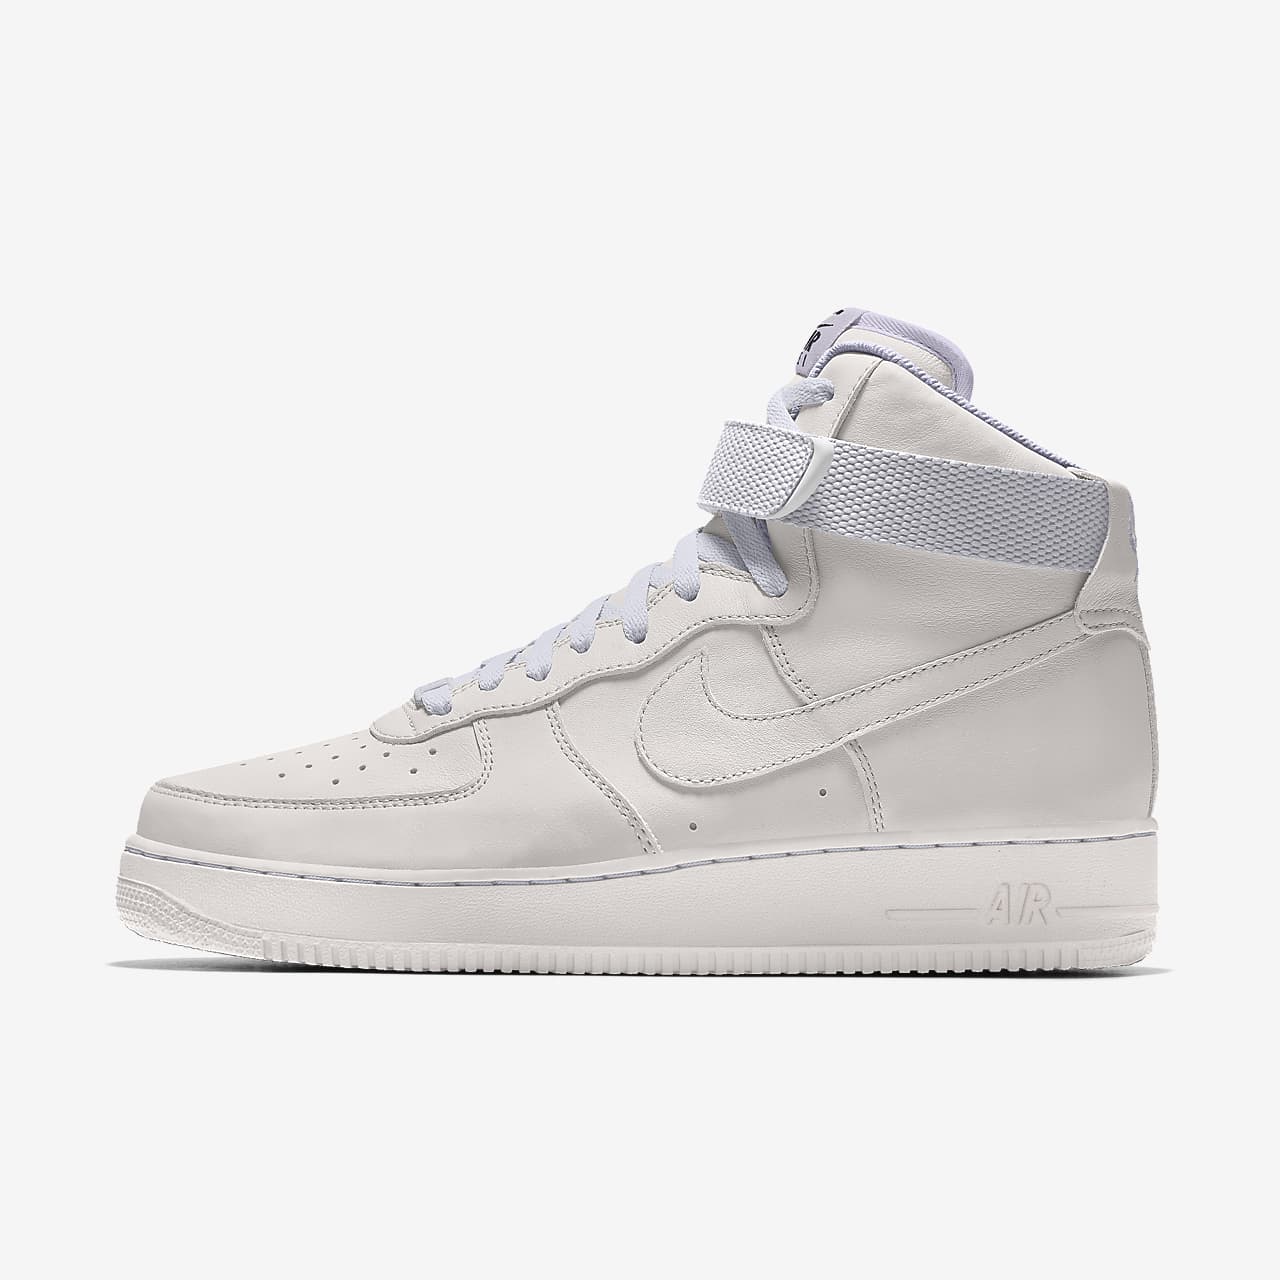 Chaussure personnalisable Nike Air Force 1 High By You pour Femme